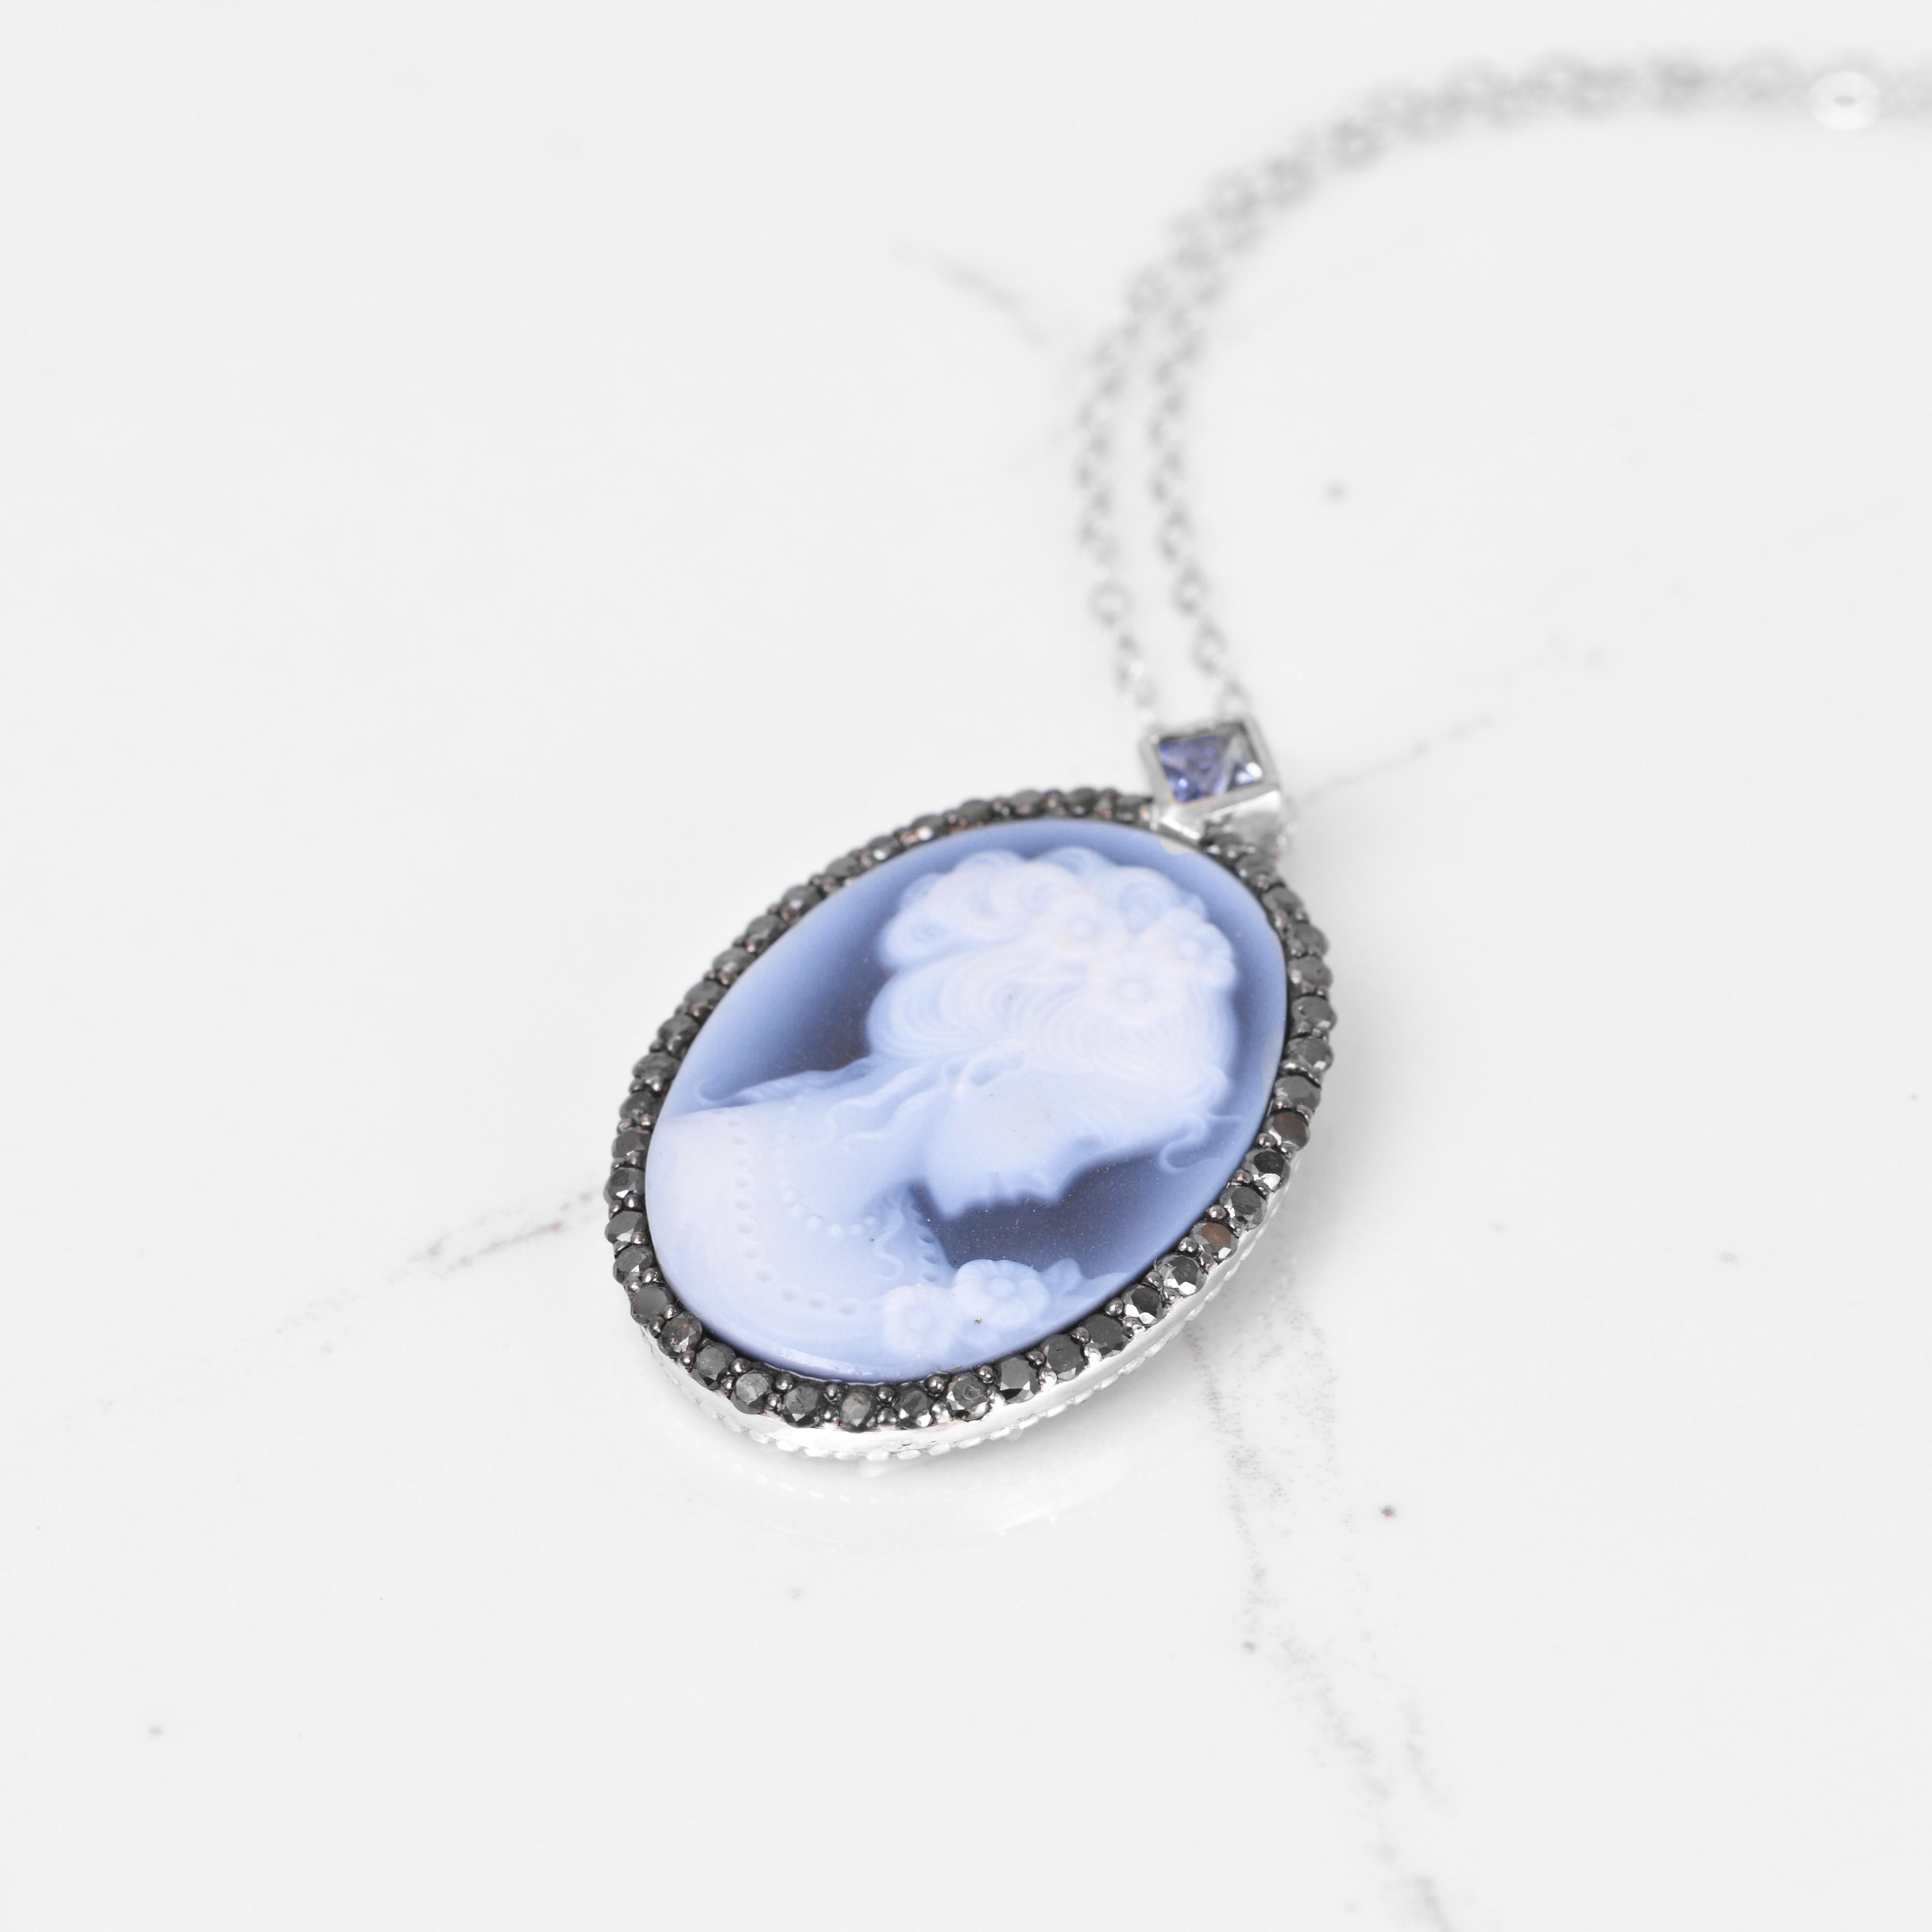 All the vintage feels with this gorgeous vintage inspired cameo pendant. Surrounding the beautiful cameo is a black diamond halo, and a blue sapphire accent. All set in white gold. The dimensions of this pendant are 32mm x 21mm.